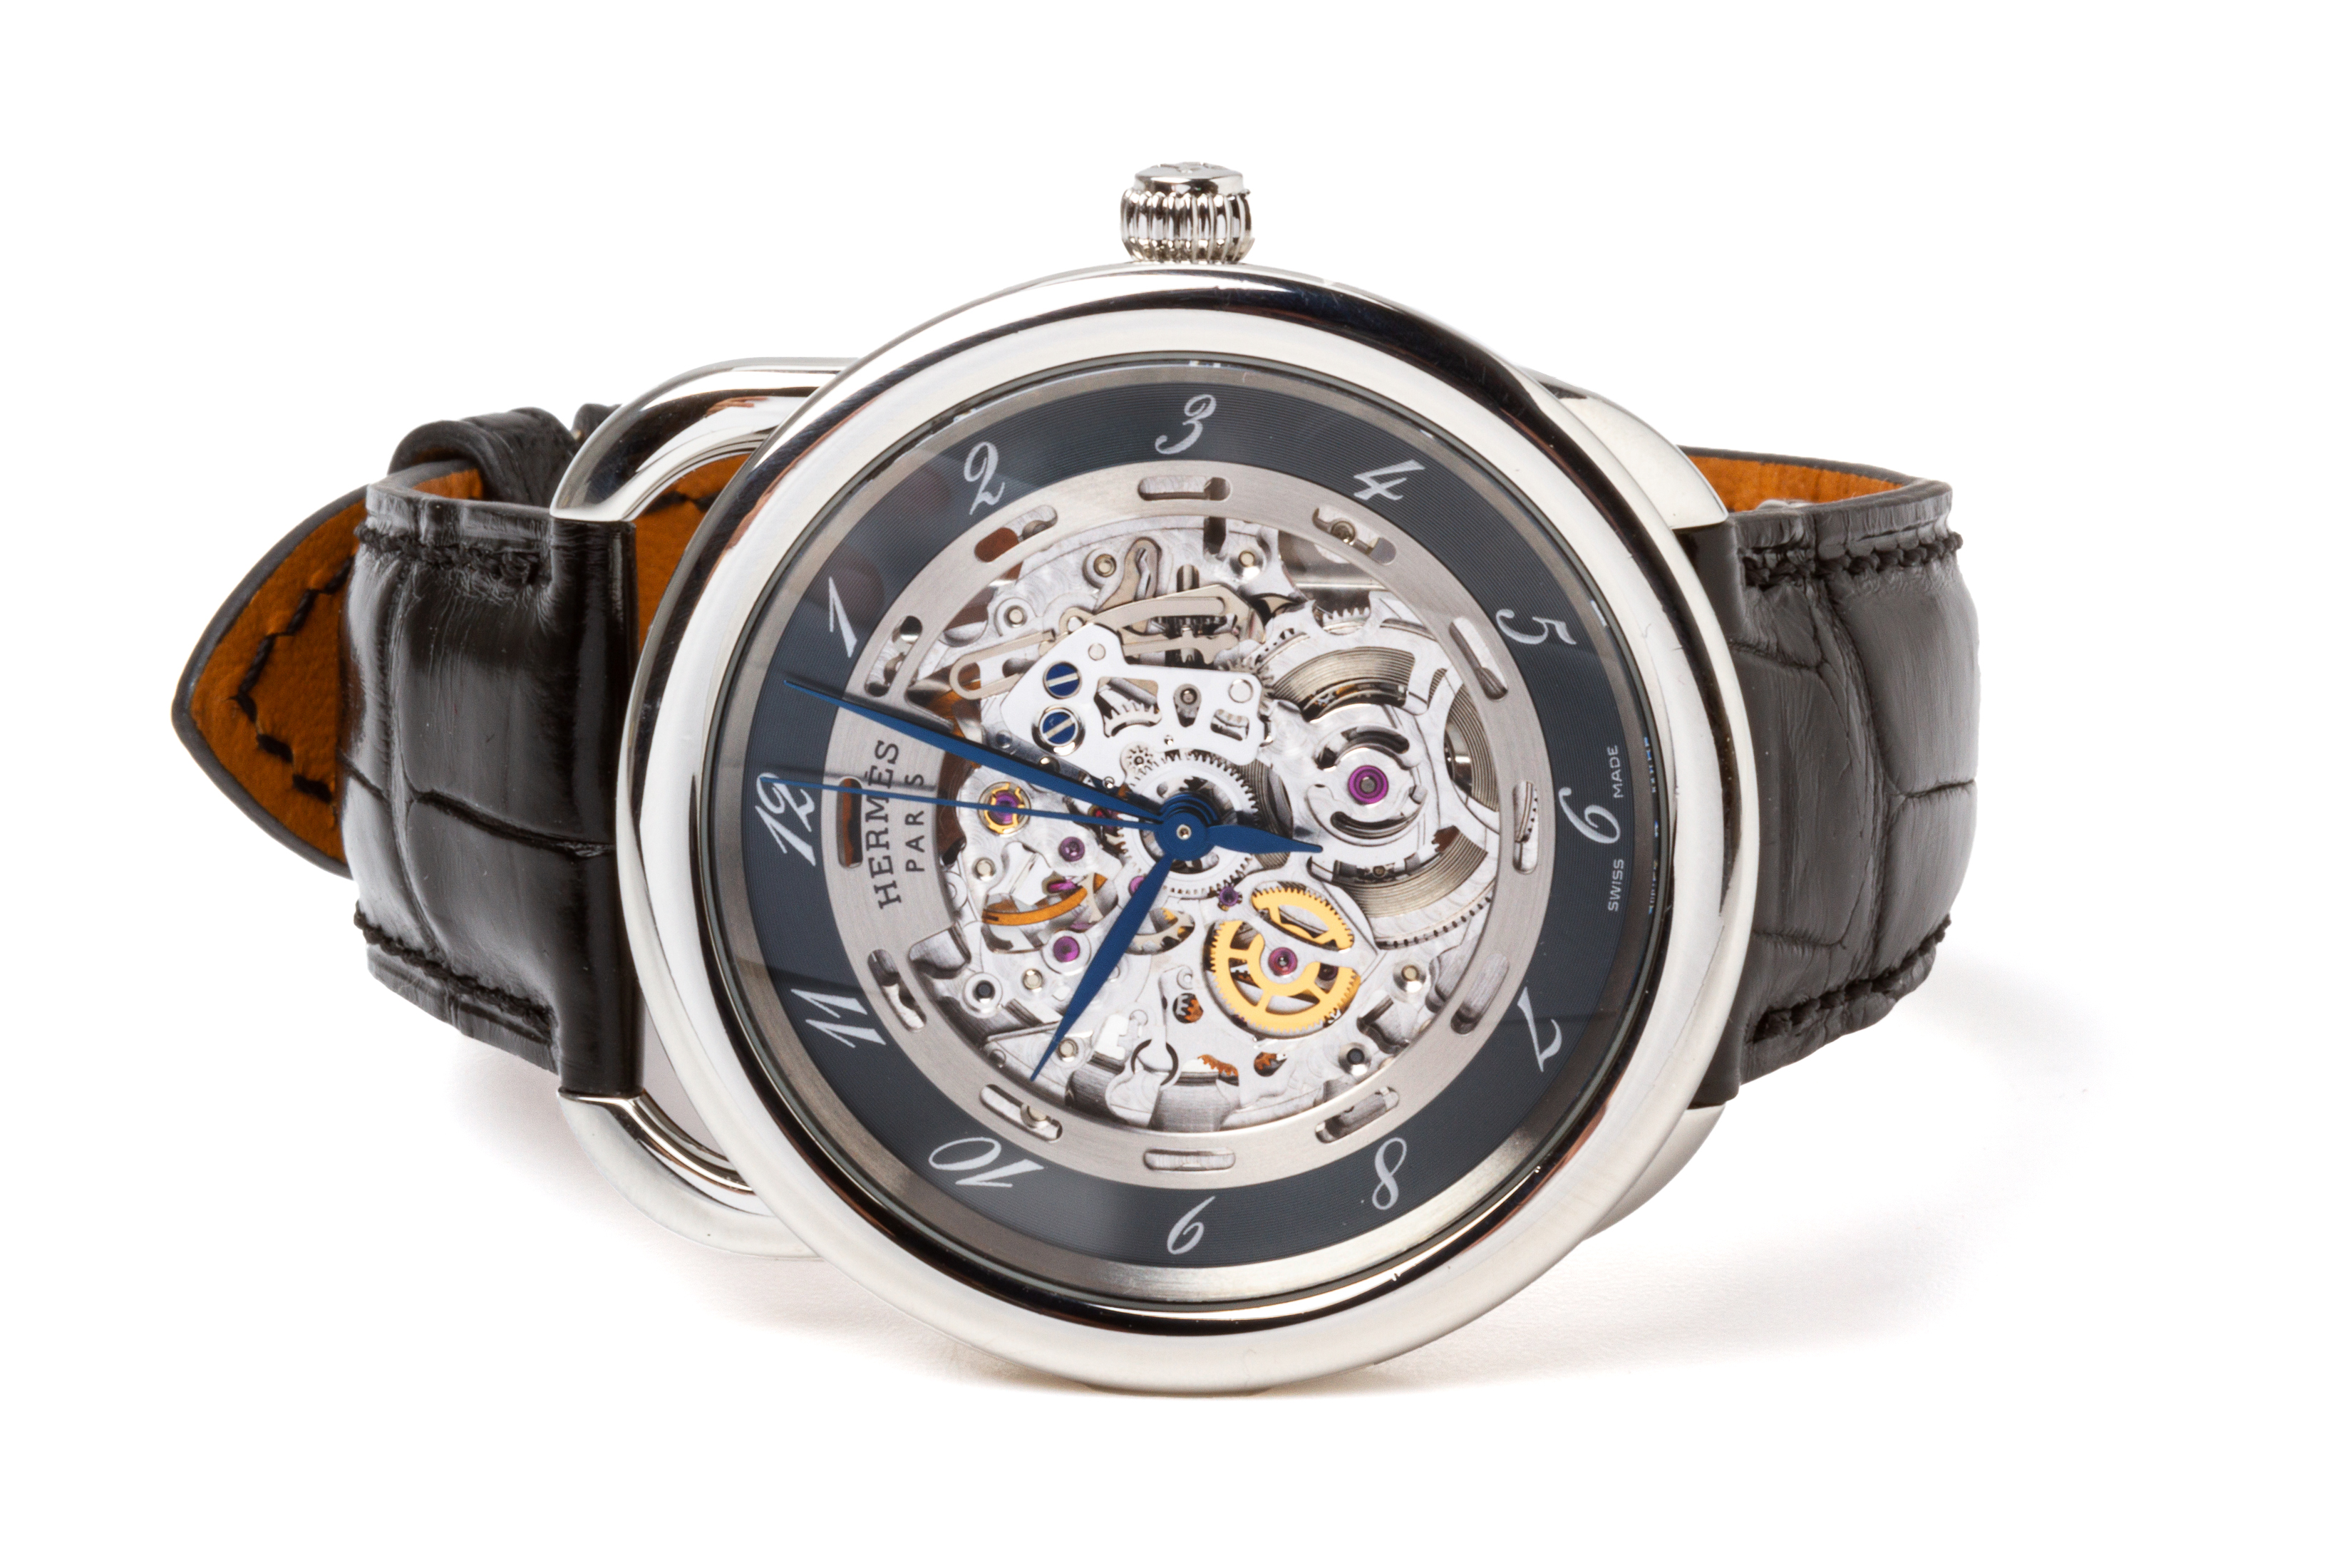 AN HERMES ARCEAU STAINLESS STEEL AUTOMATIC WRISTWATCH - Image 2 of 4